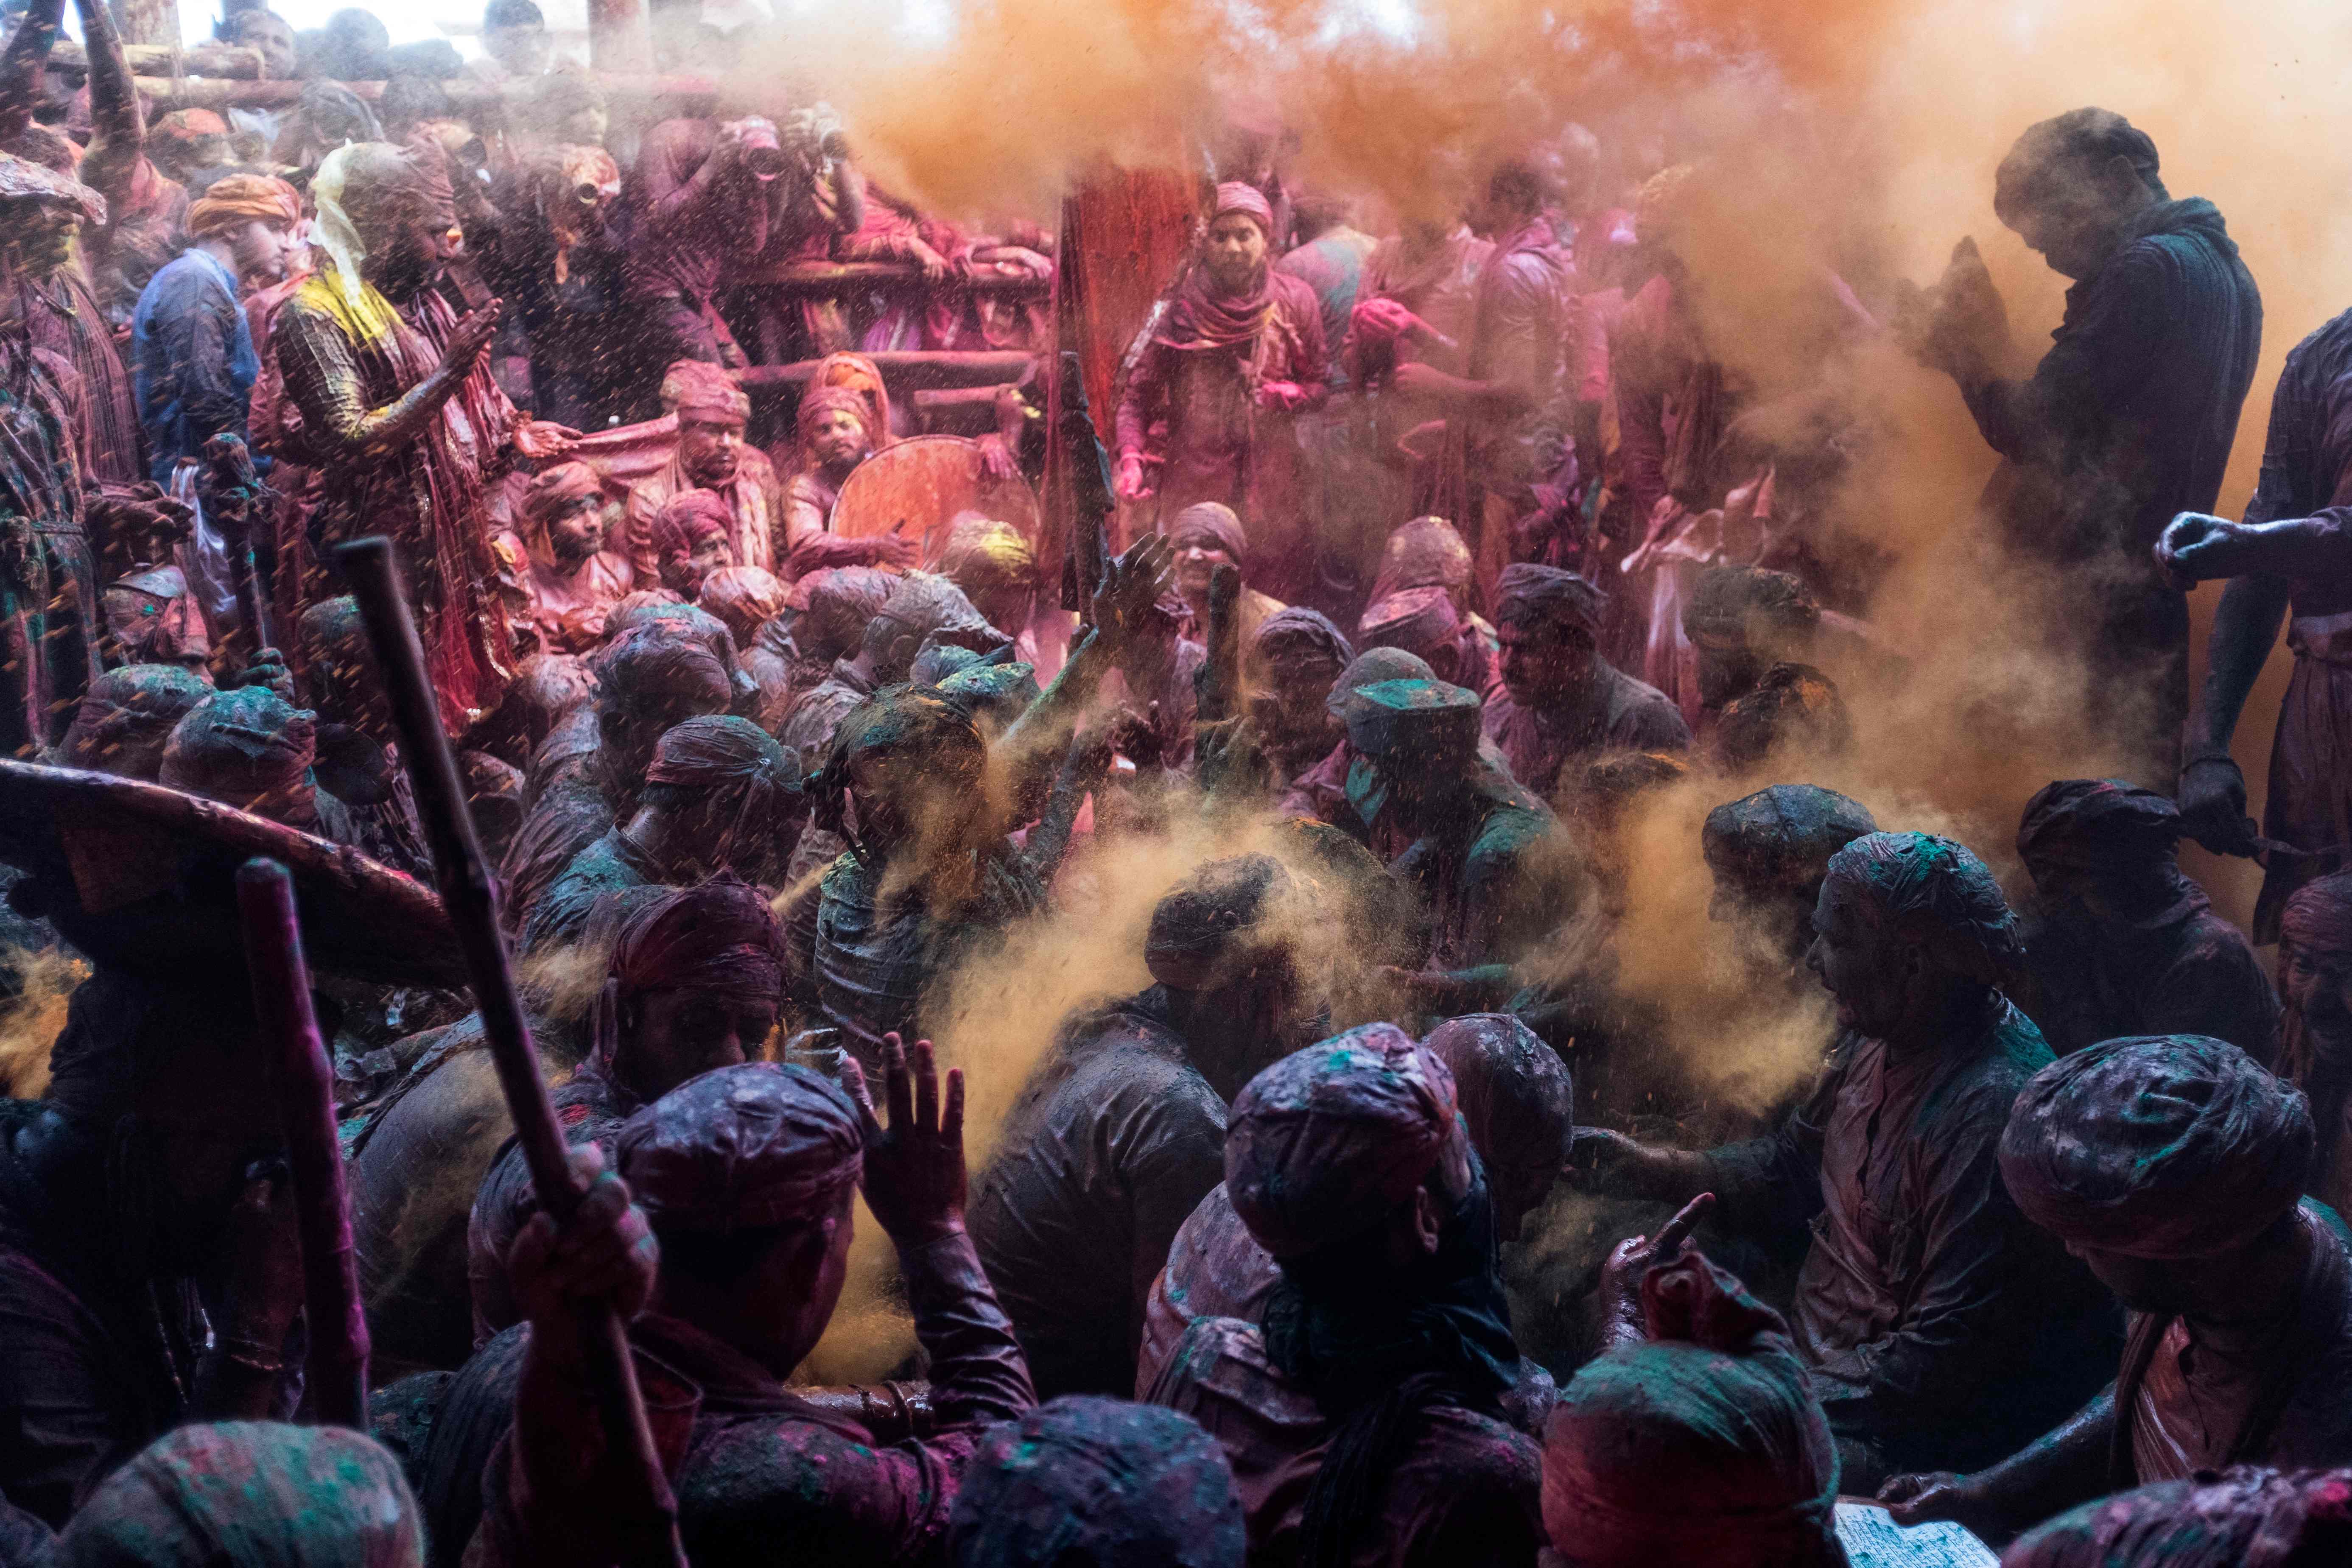 Coloured powder is thrown over Hindu devotees in a traditional gathering during Holi celebrations, the spring festival of colours, at a temple in Barsana village in Uttar Pradesh, India